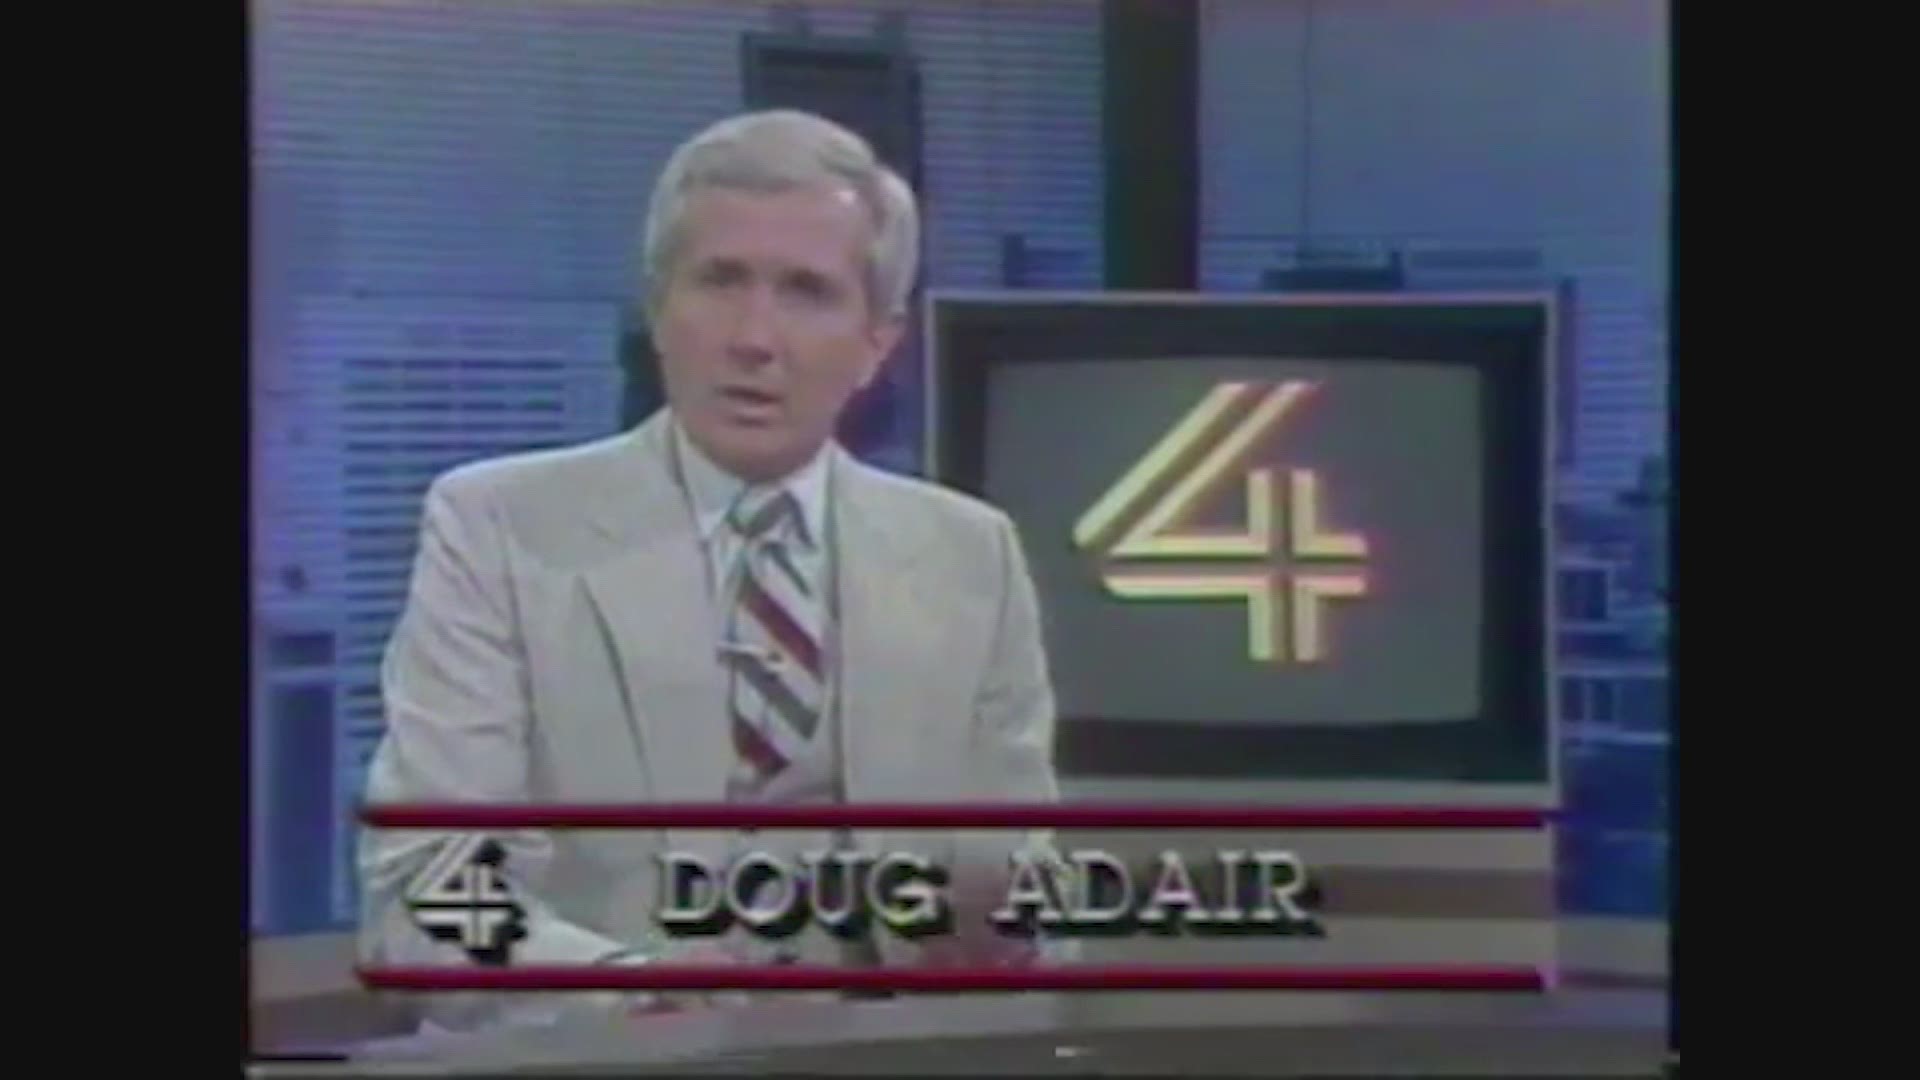 Look back at the career of former WKYC anchor Doug Adair, who died at the age of 89 Wednesday.